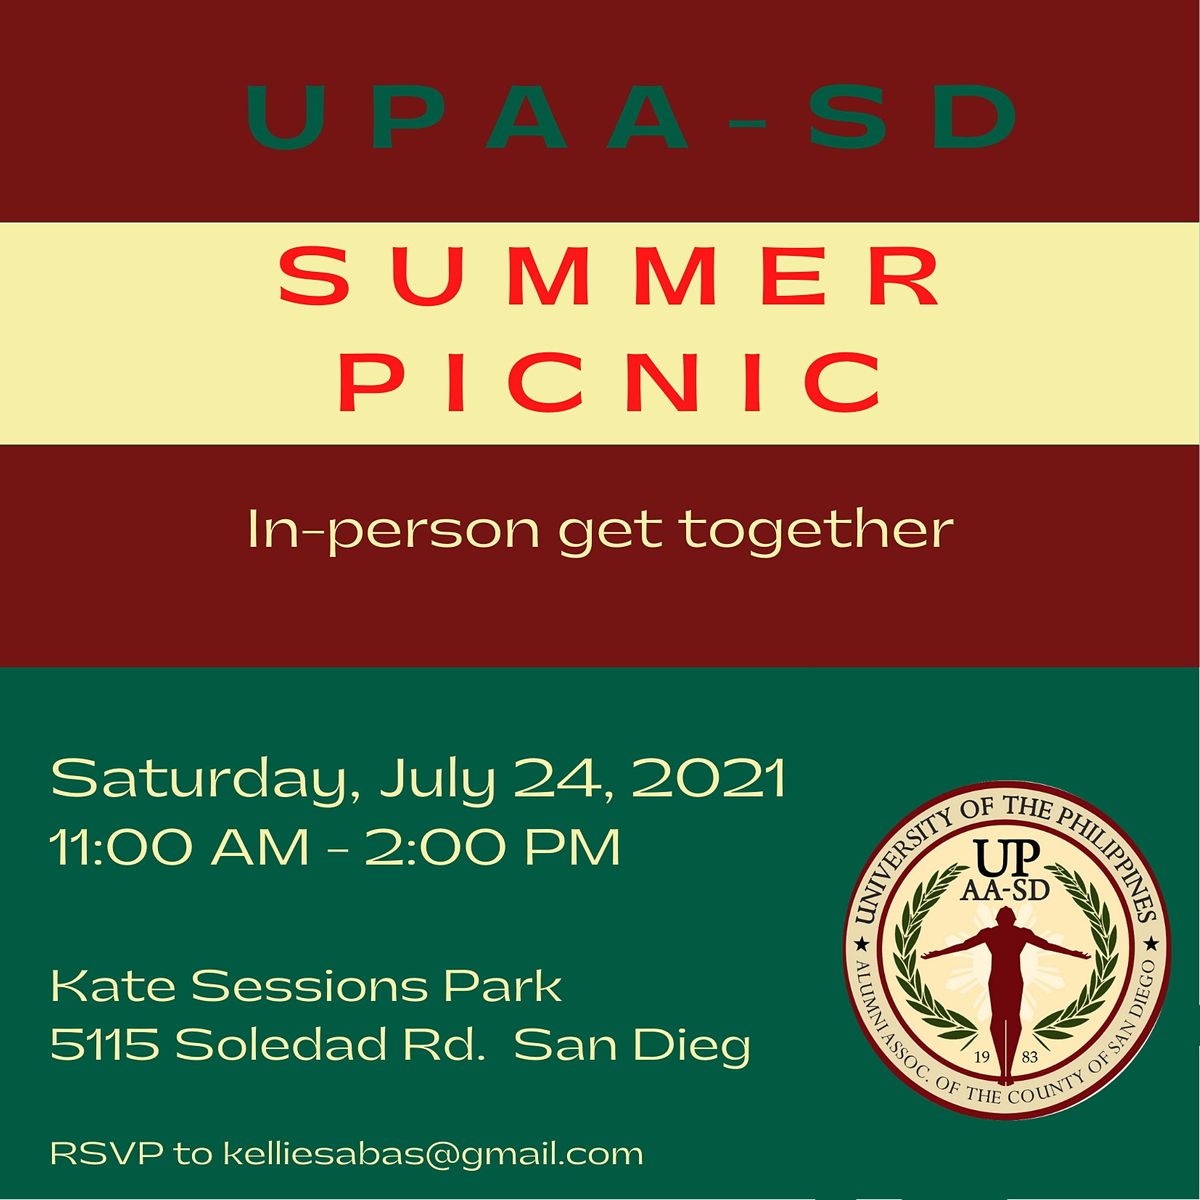 UPAA-SD Summer Picnic (In-Person Event)